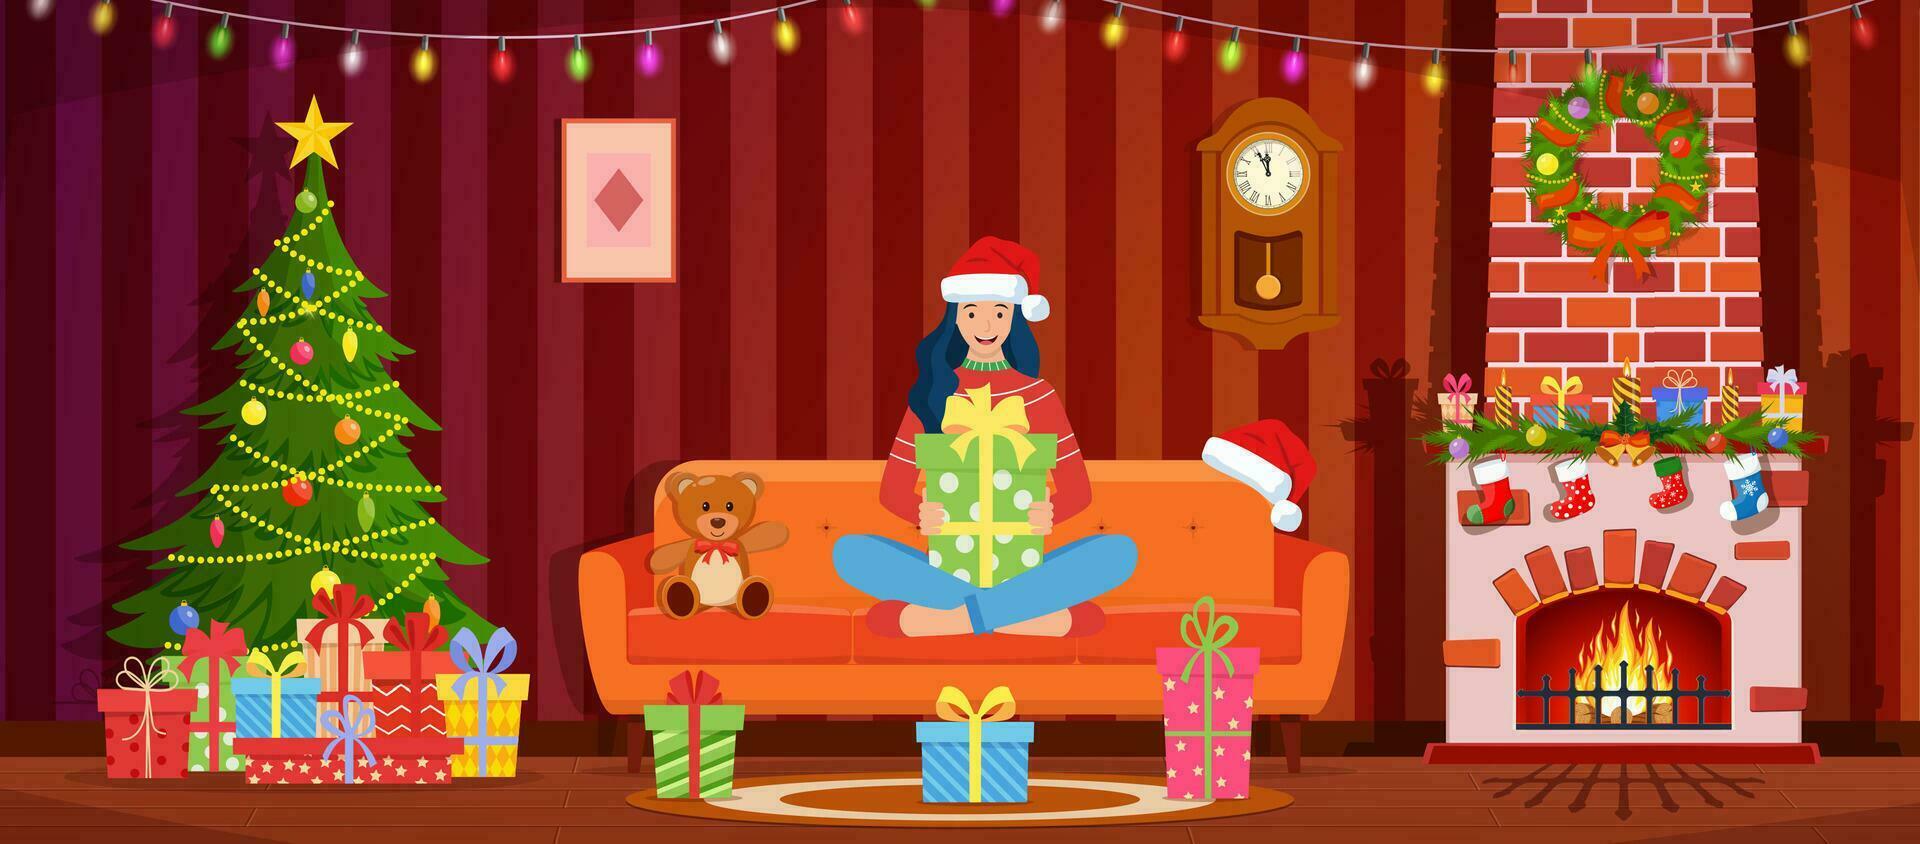 Cartoon Cozy Interior of Living Room with Woman on Sofa, Fireplace, Christmas Tree. Happy New Year Decoration. Merry Christmas Holiday. New Year and Xmas Celebration.Vector illustration in flat style vector